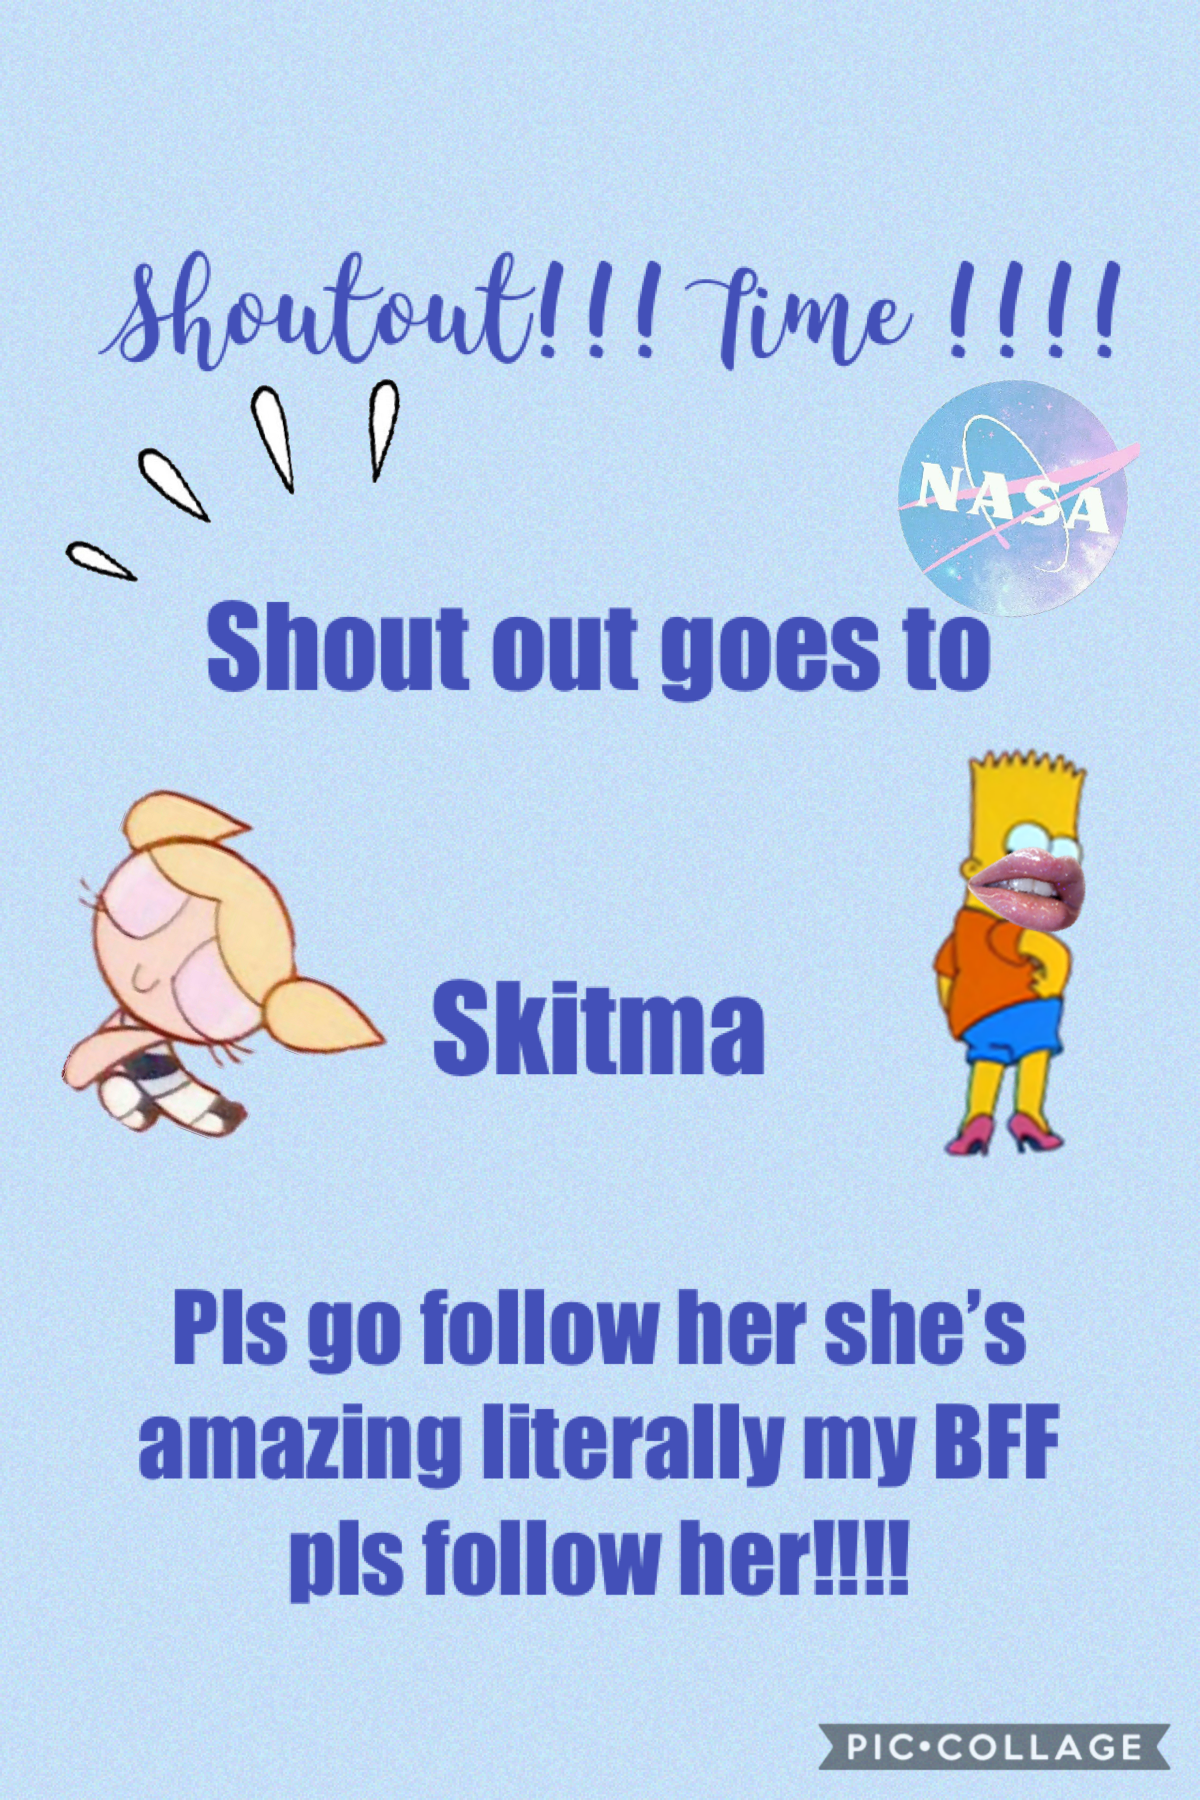 Shout out time

Go follow Skitma NOW